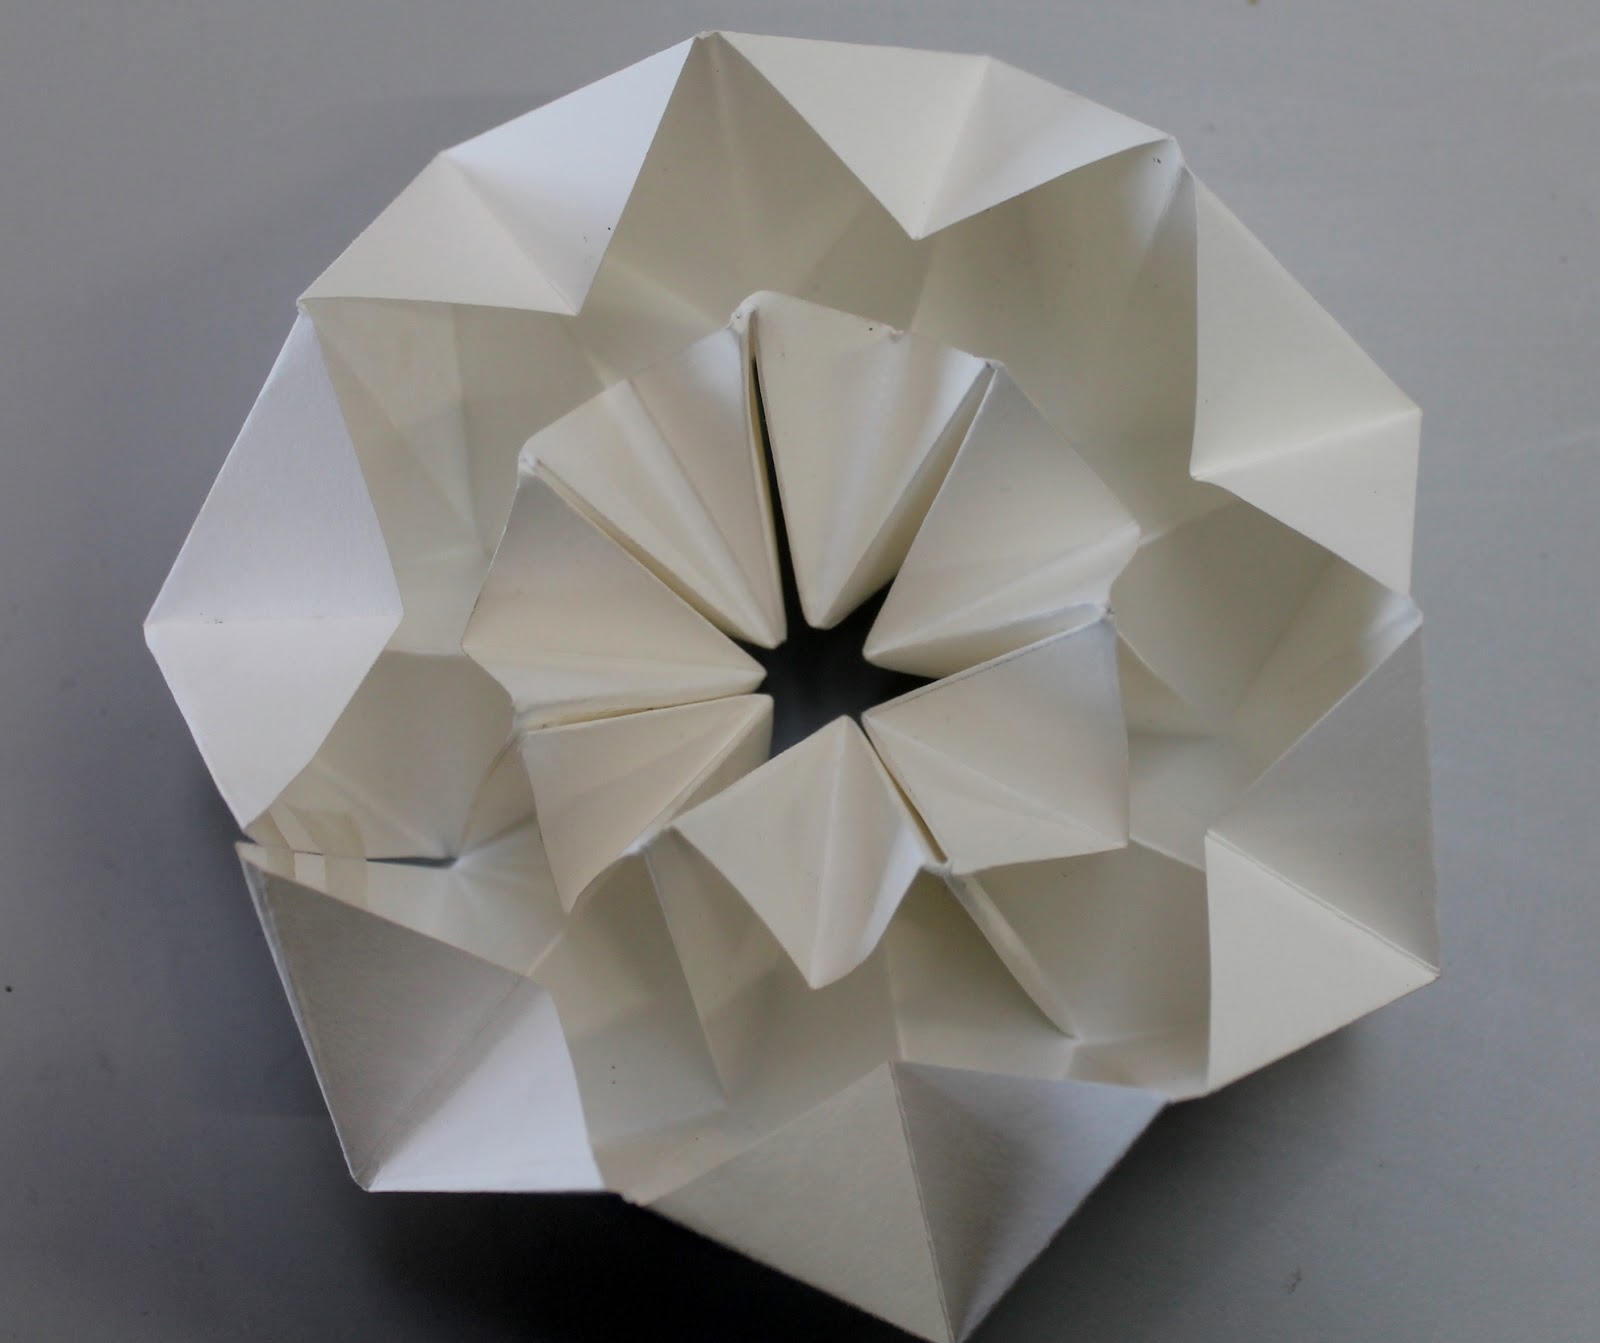 The First of Many...: The Origami Kaleidoscope